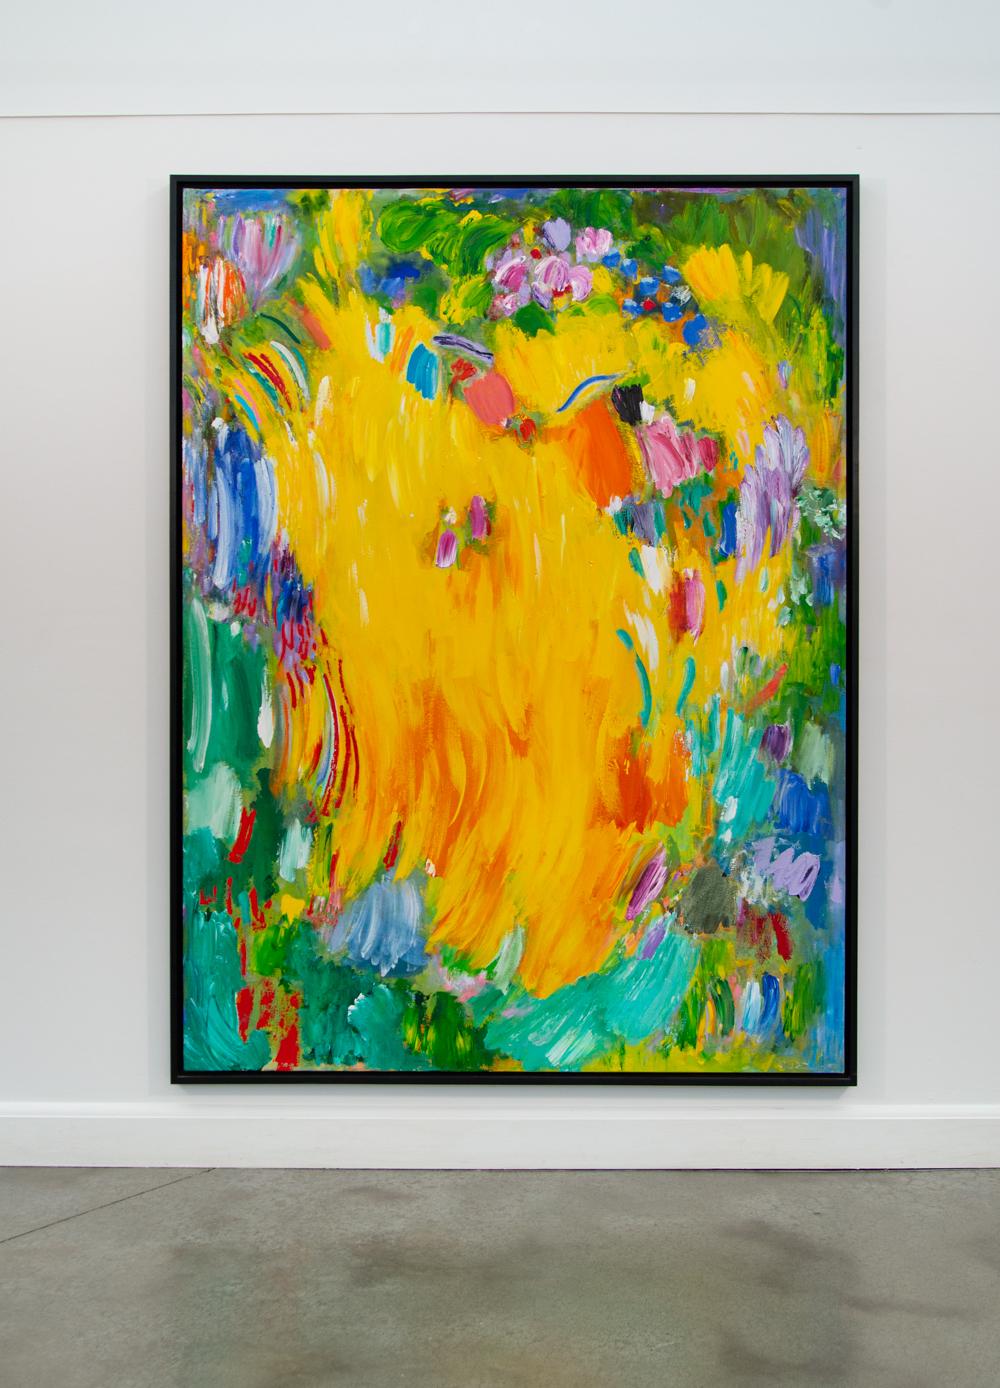 Tropic Noon - large, bright, colorful, abstract expressionist, acrylic on canvas - Painting by Paul Fournier